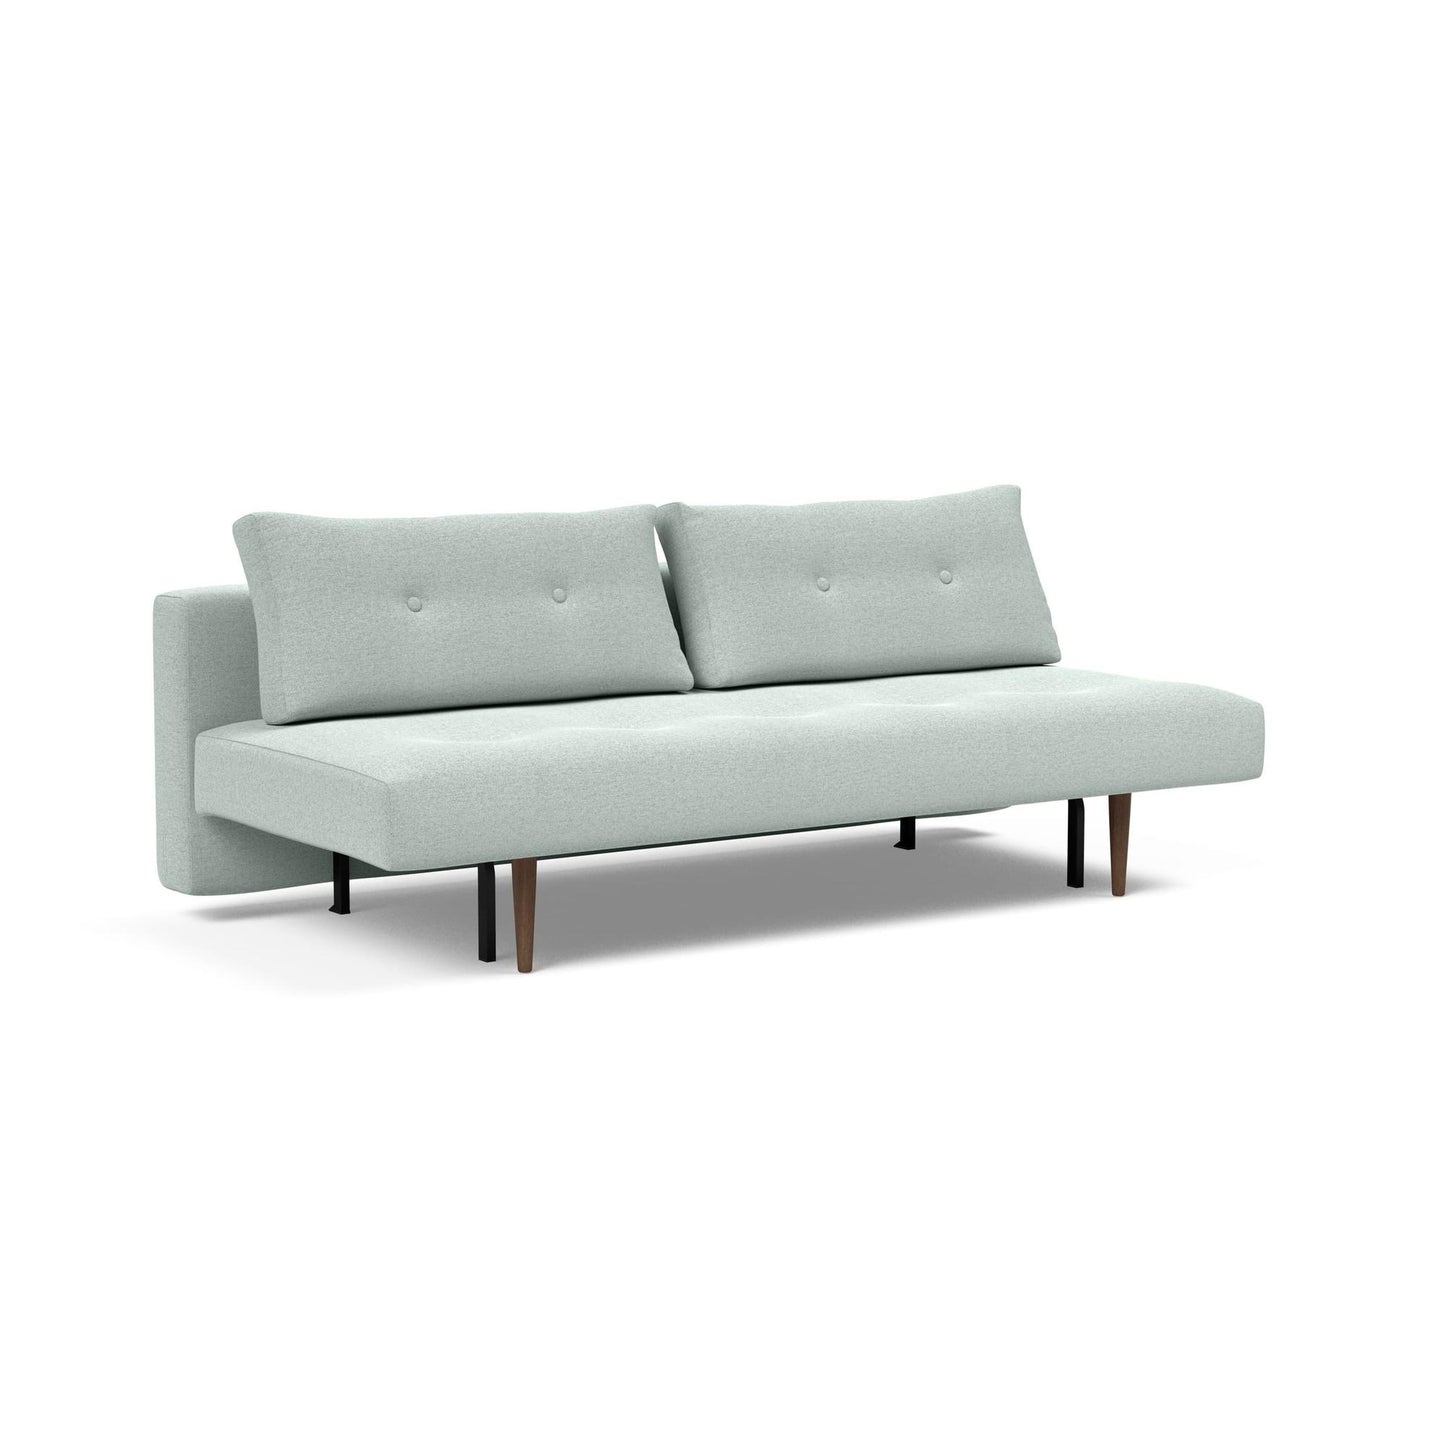 Recast Plus Sofa Bed in Soft Pacific Pearl